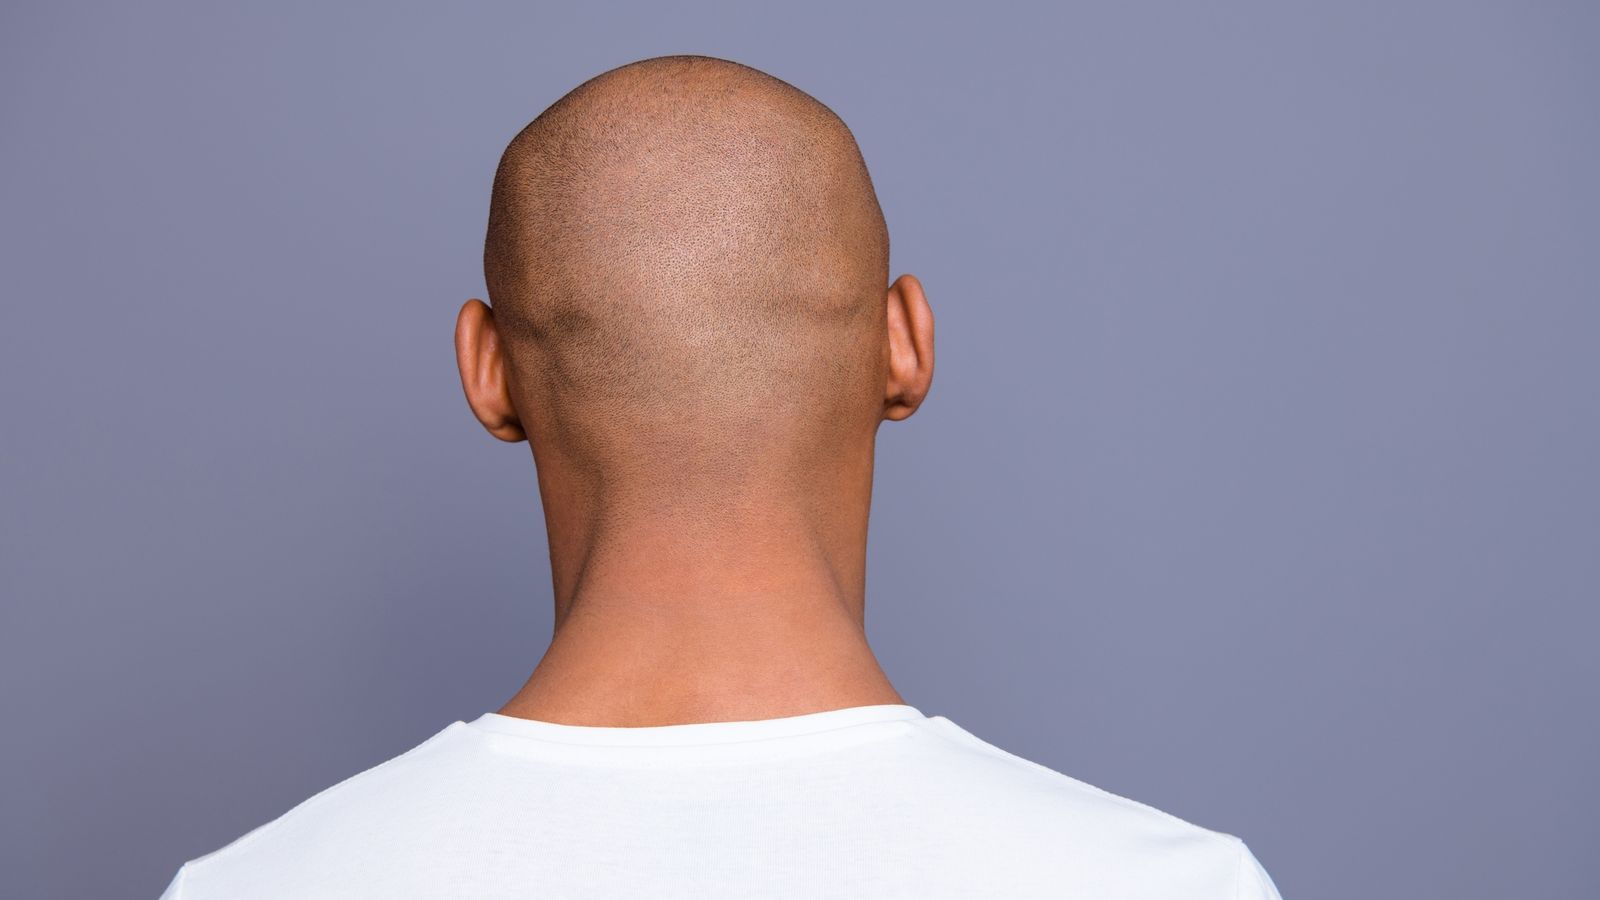 Calling a man bald is sexual harassment, employment tribunal rules